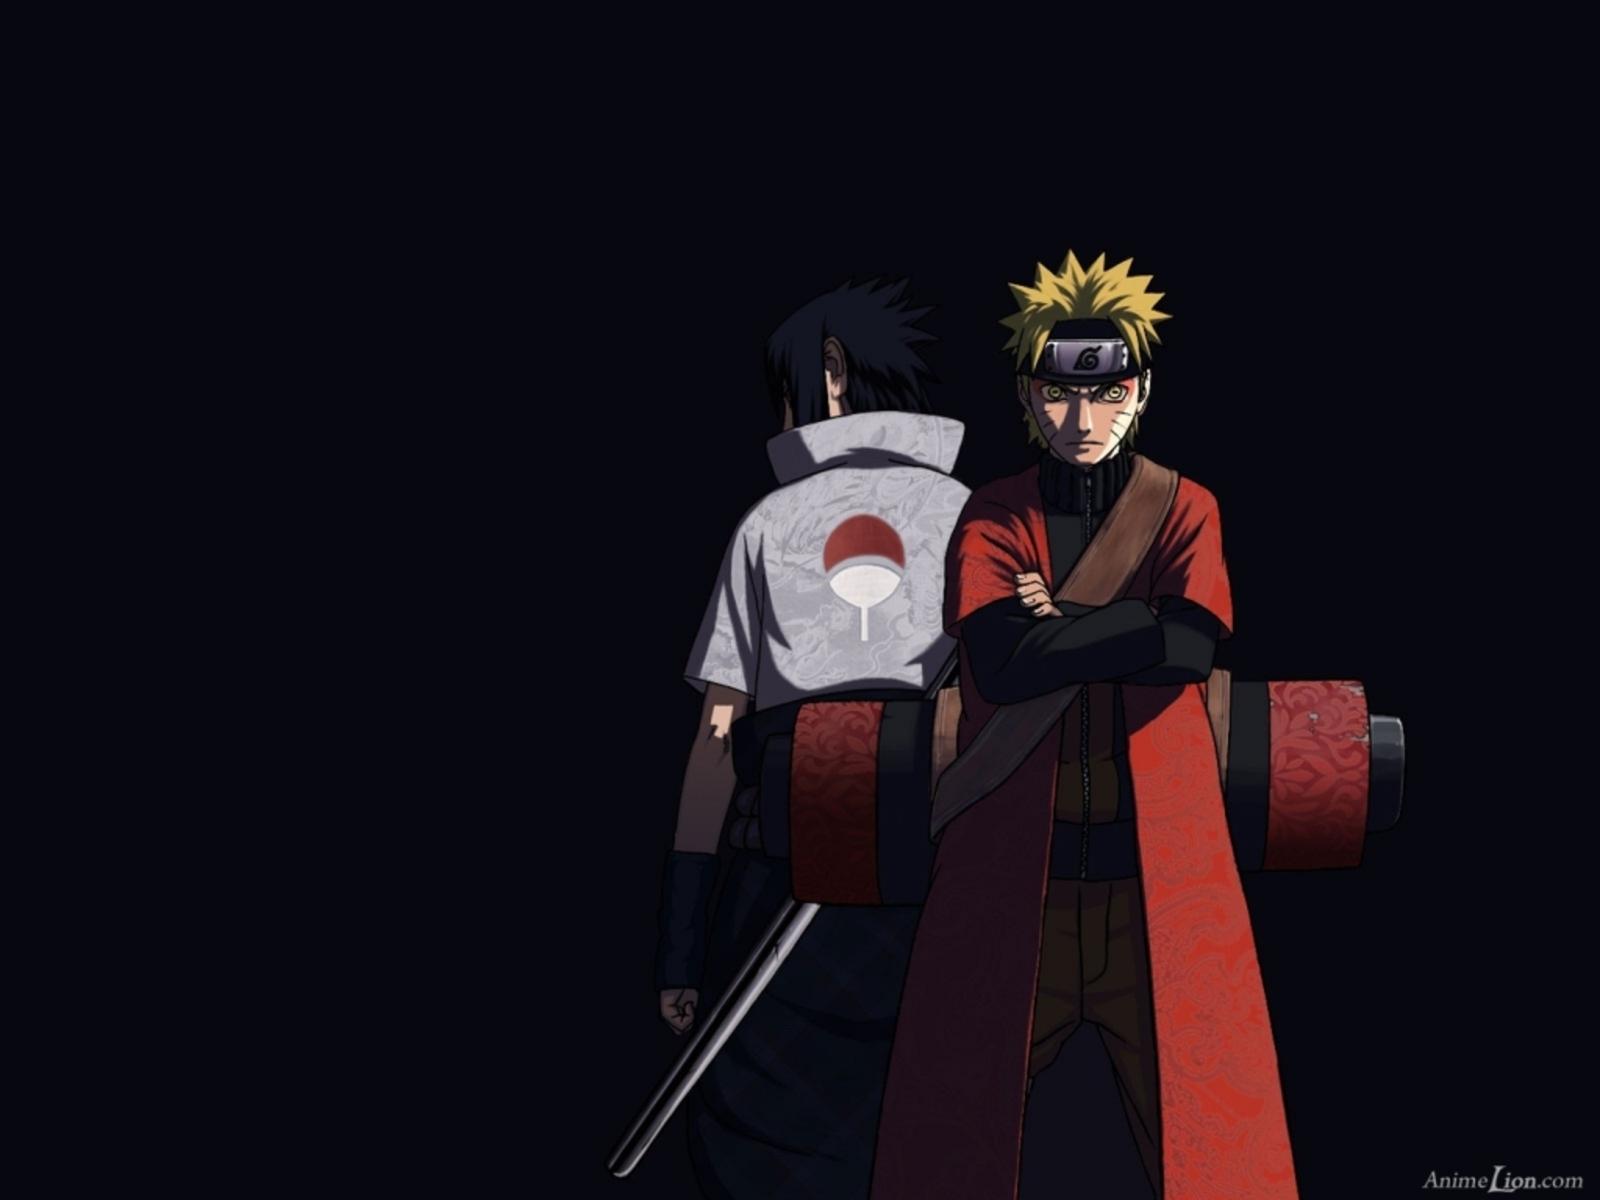 1600 x 1200 · jpeg - 10 Best Naruto Shippuden Hd Wallpapers FULL HD 1080p For PC Background 2020